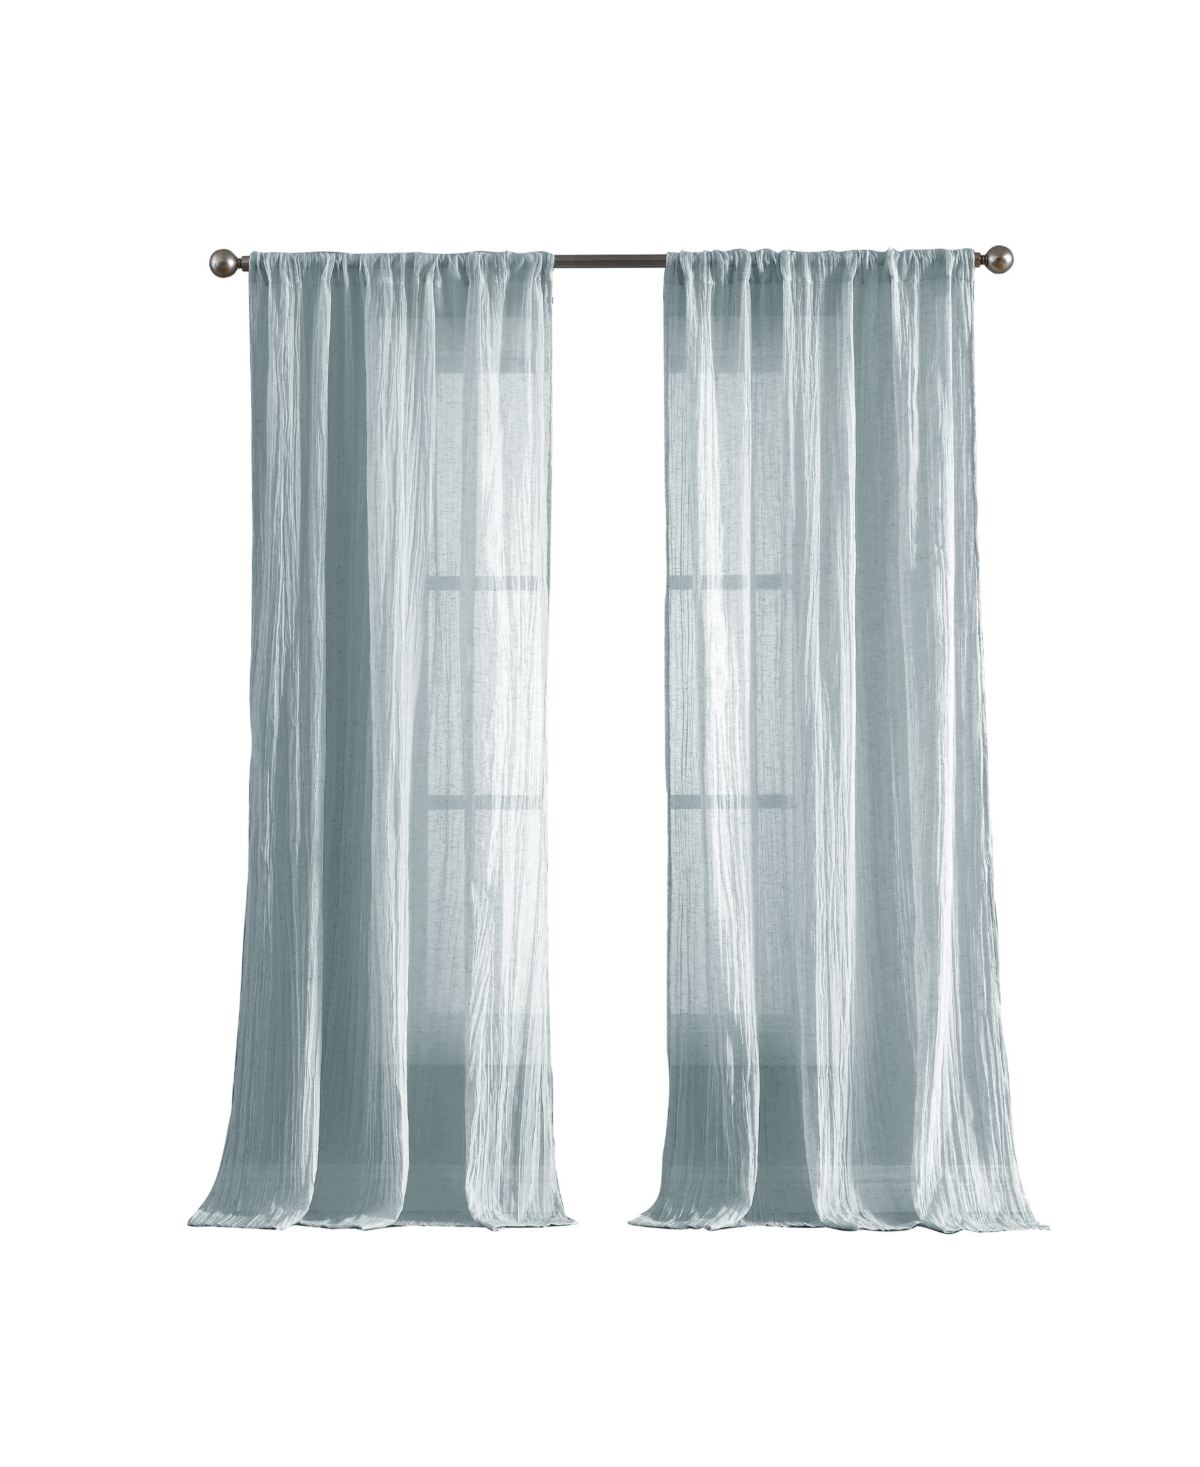 French Connection Charter Crushed Semi-sheer Rod Pocket Window Panel Pair, 108" X 50" In Aqua